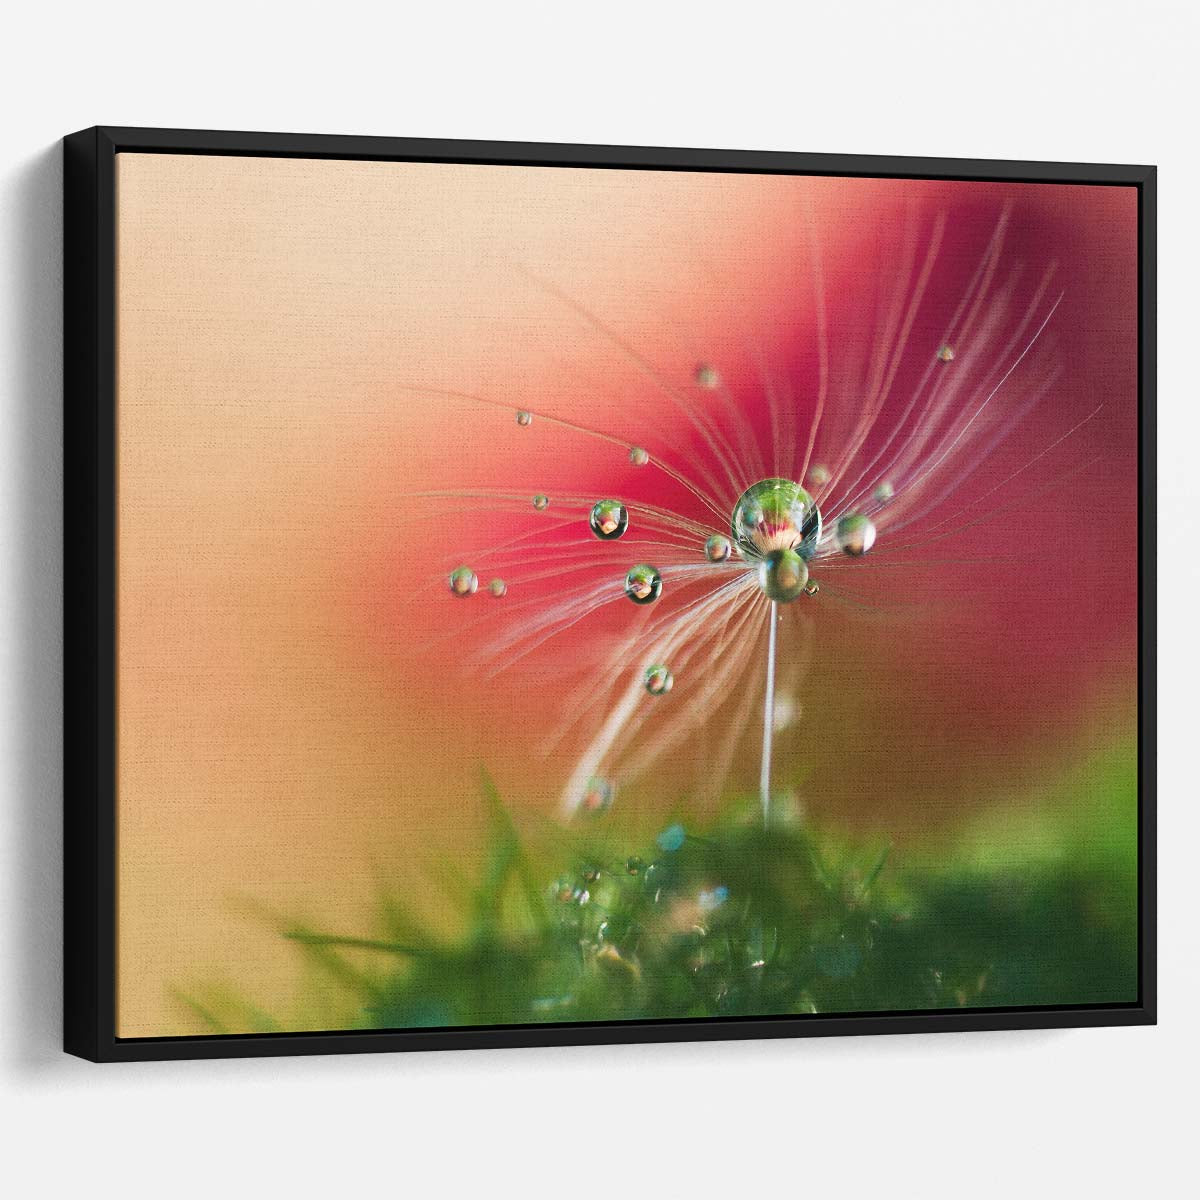 Red Macro Dandelion Seed Droplets Bokeh Wall Art by Luxuriance Designs. Made in USA.